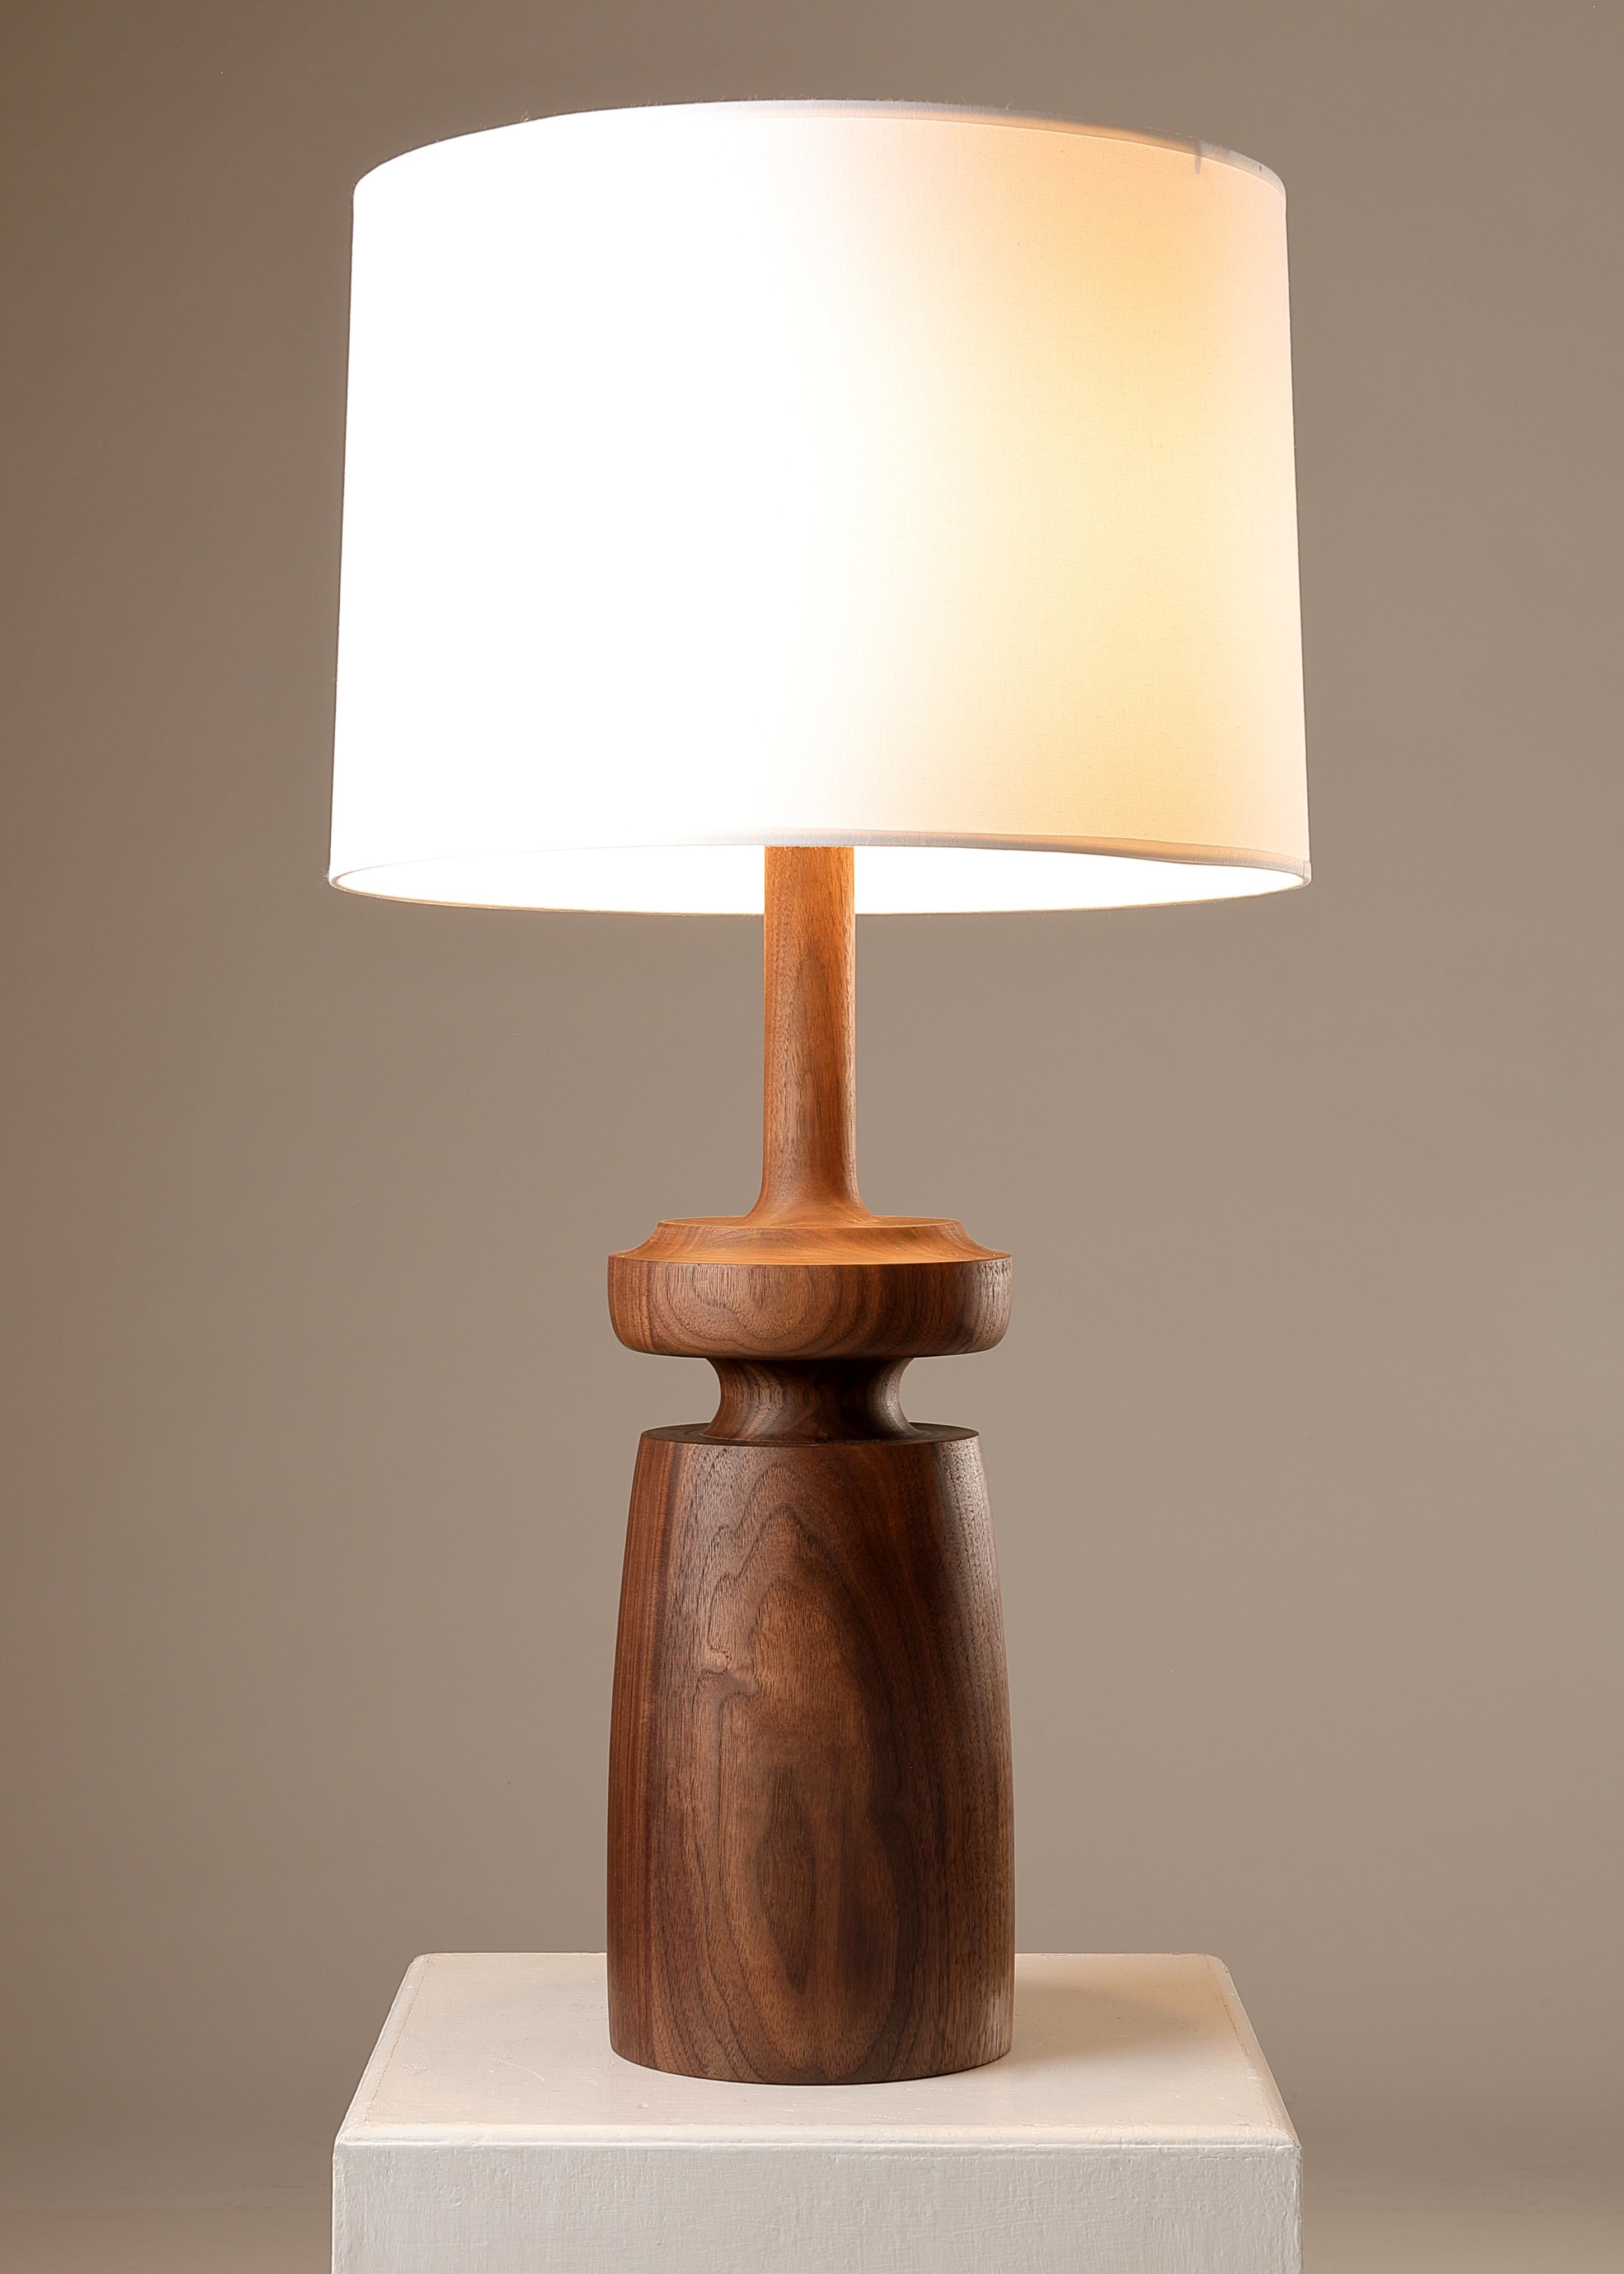 Lathe Turned Walnut table lamp form TWLF by Michael Rozell. A similar, slightly smaller model is listed, too. 
